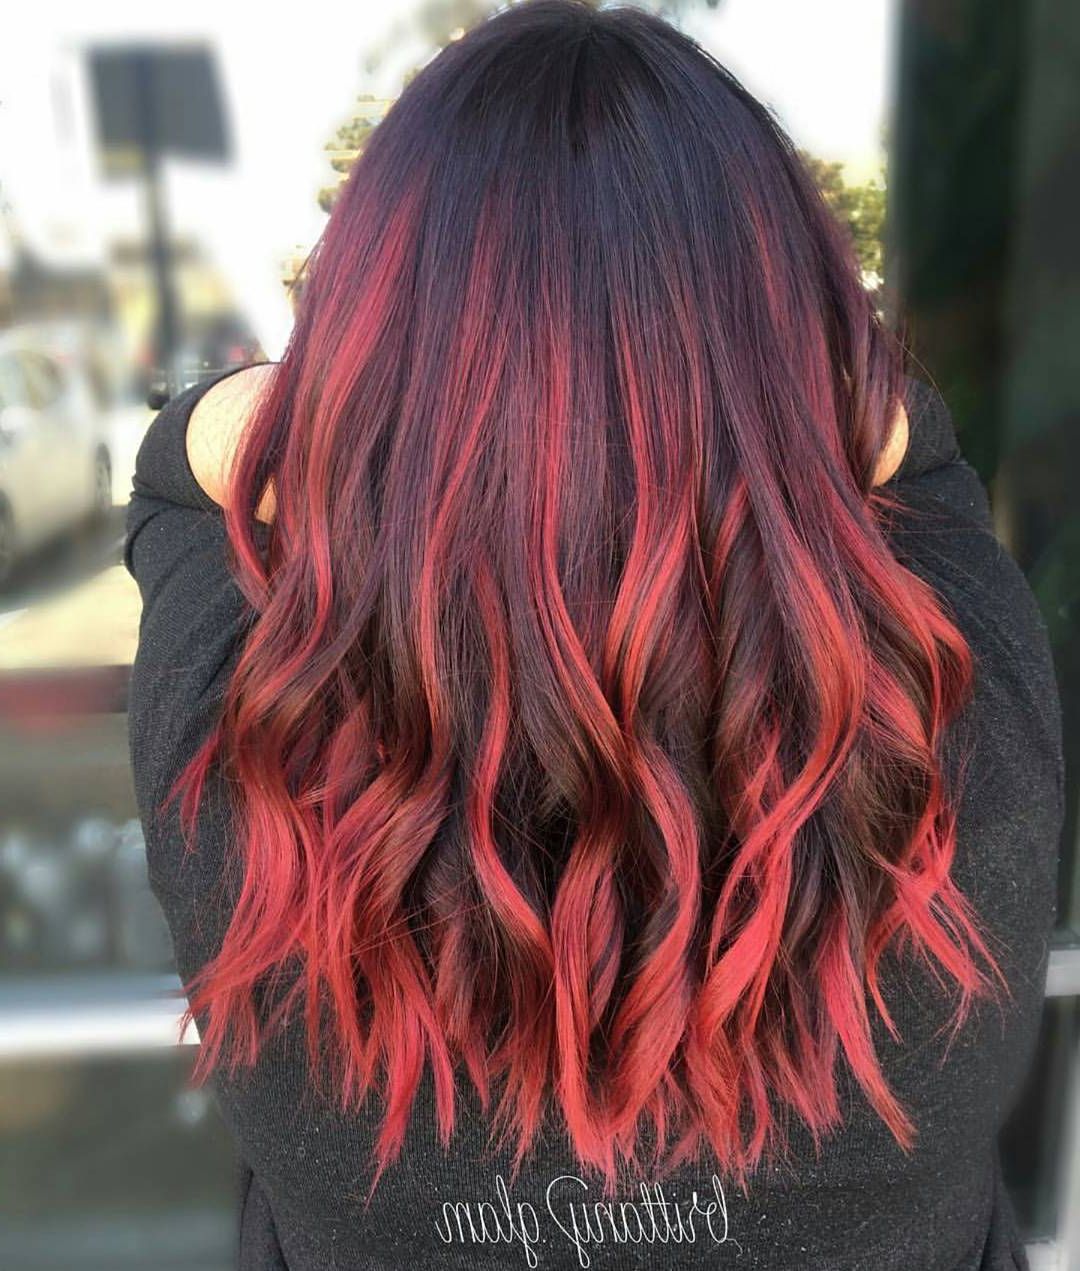 Most Recently Released Medium Hairstyles For Red Hair With 10 Medium Length Hairstyles For Thick Hair In Super Sexy Colors (View 4 of 20)